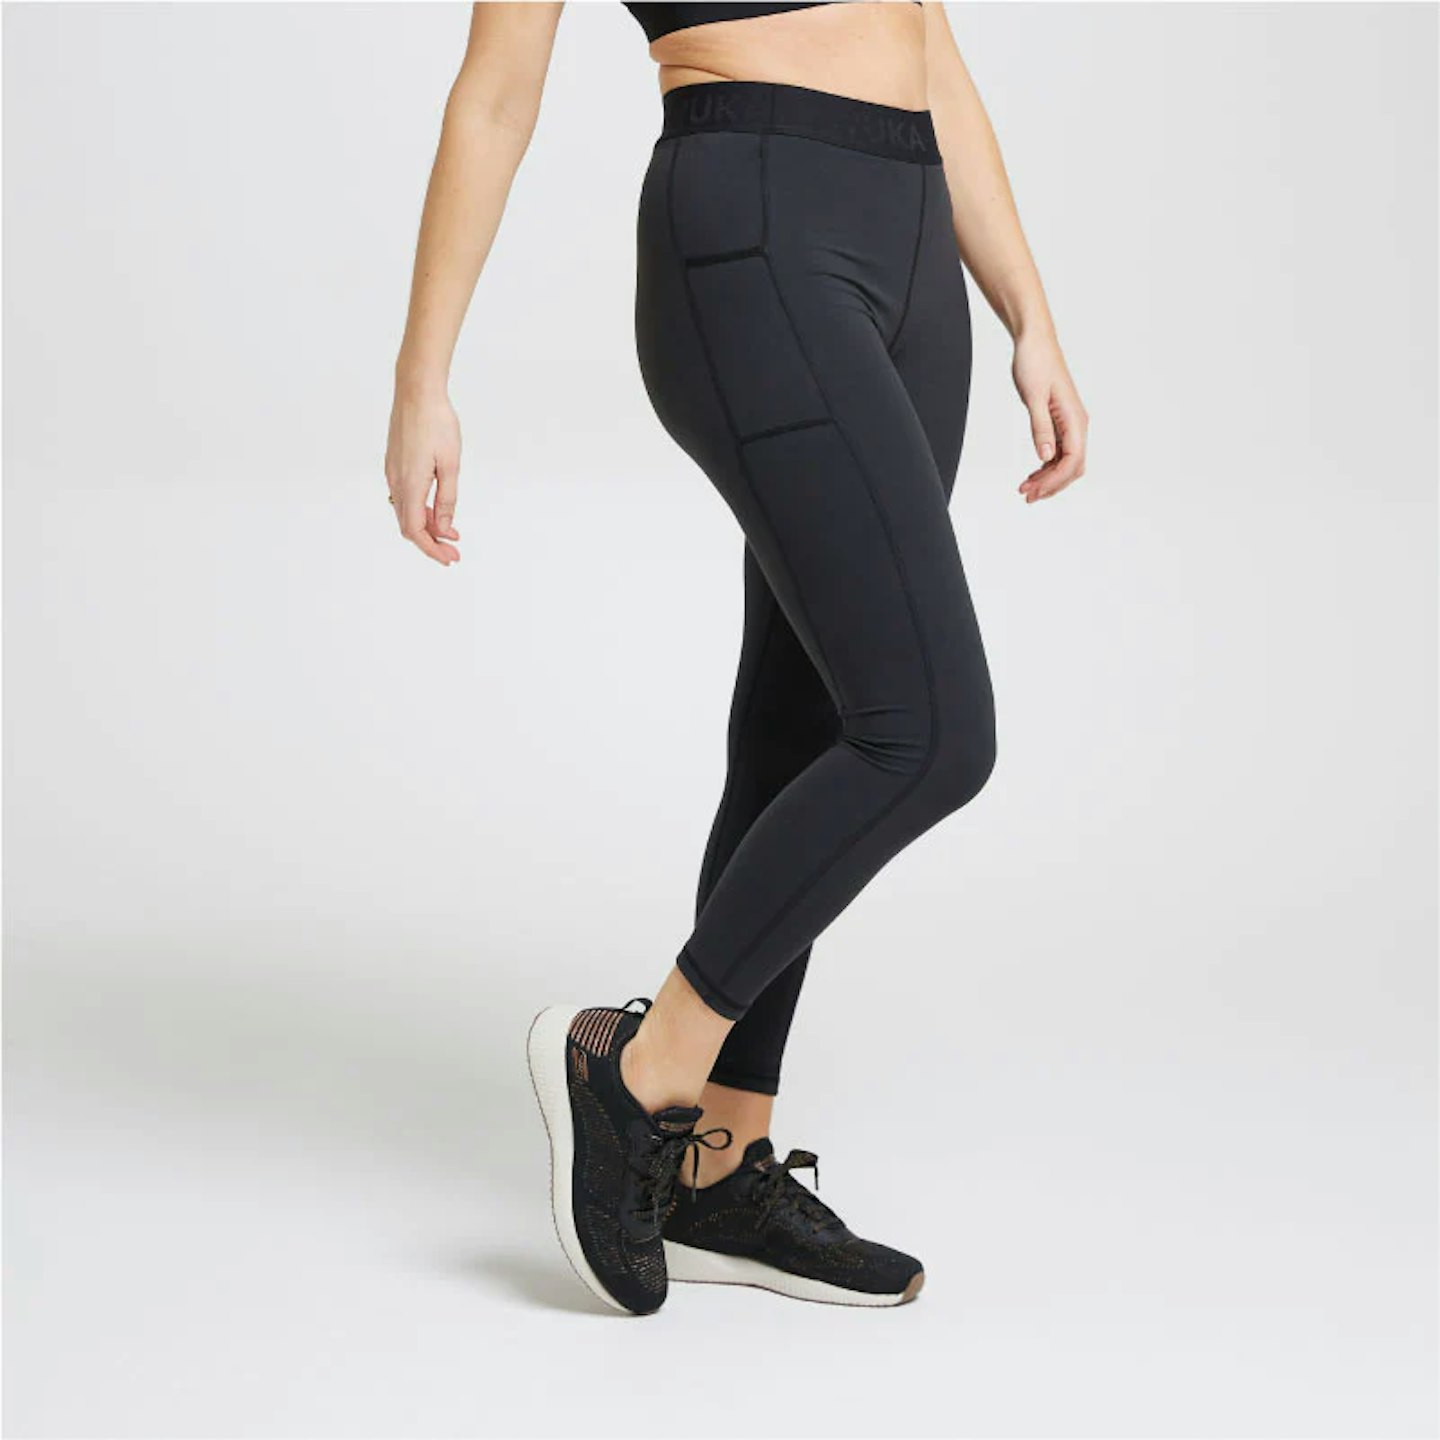 Modibodi period leggings review: Do they live up to the hype?